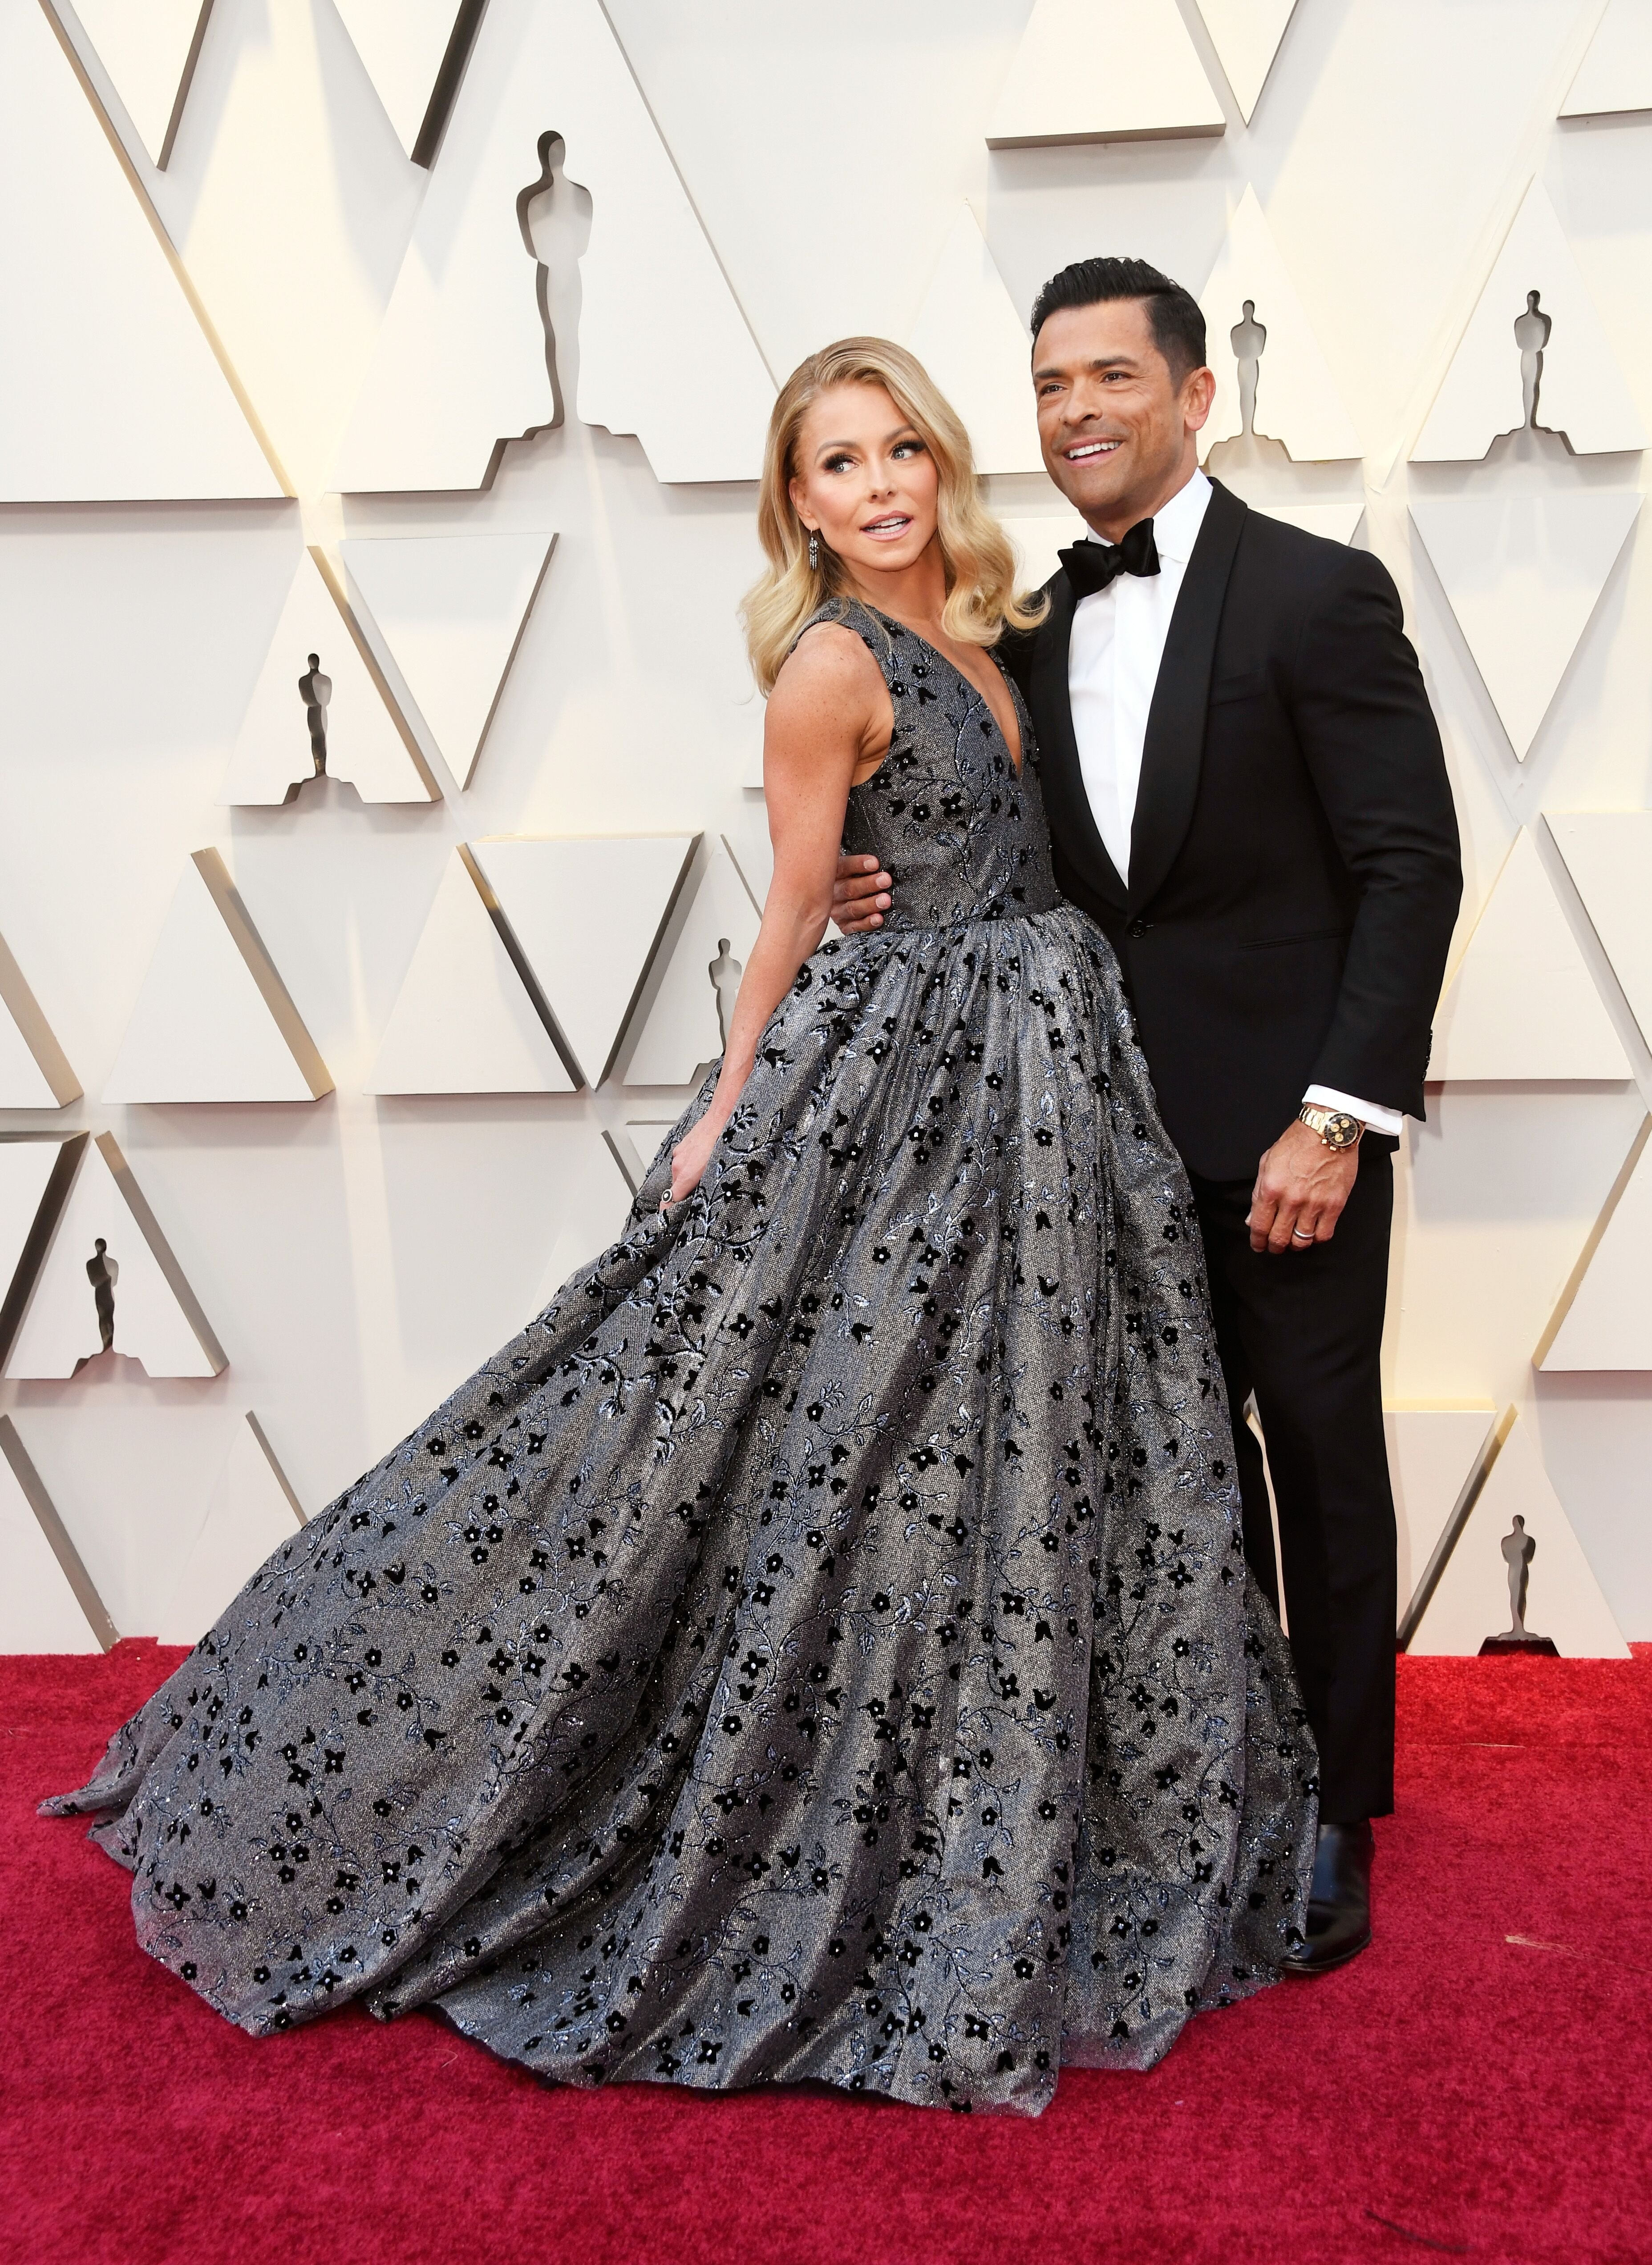 Kelly Ripa and husband Mark Consuelos at the Oscars/ Source: Getty Images